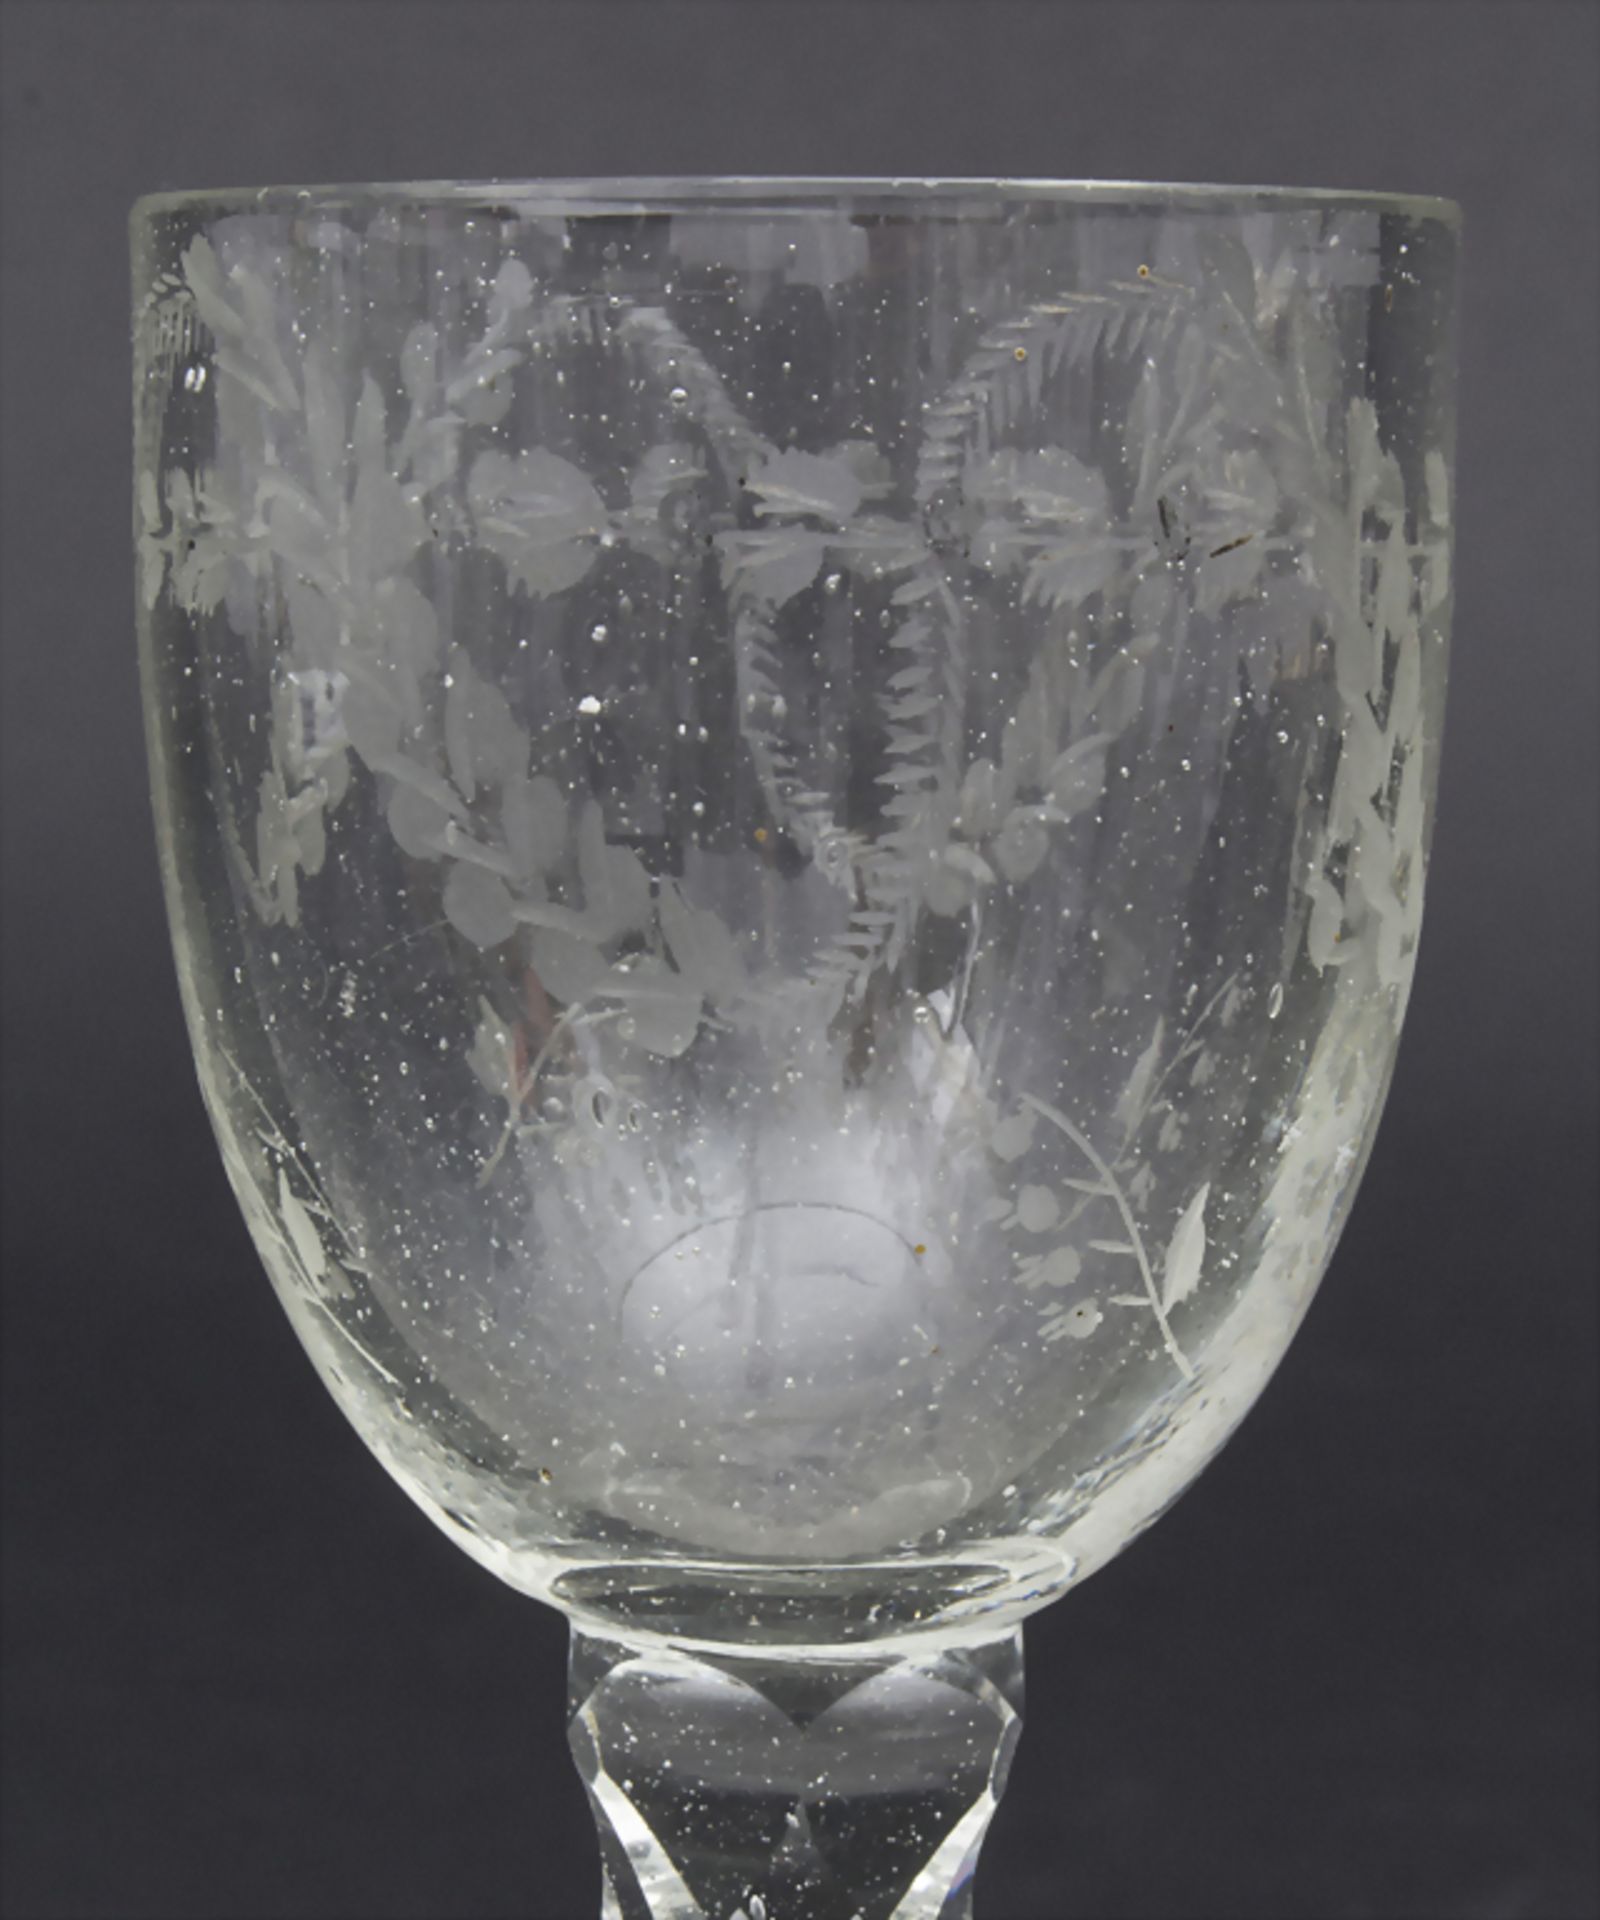 Kleines Barockglas / A small Baroque glass, deutsch, 18. Jh.Material: farbloses Glas, - Image 4 of 5